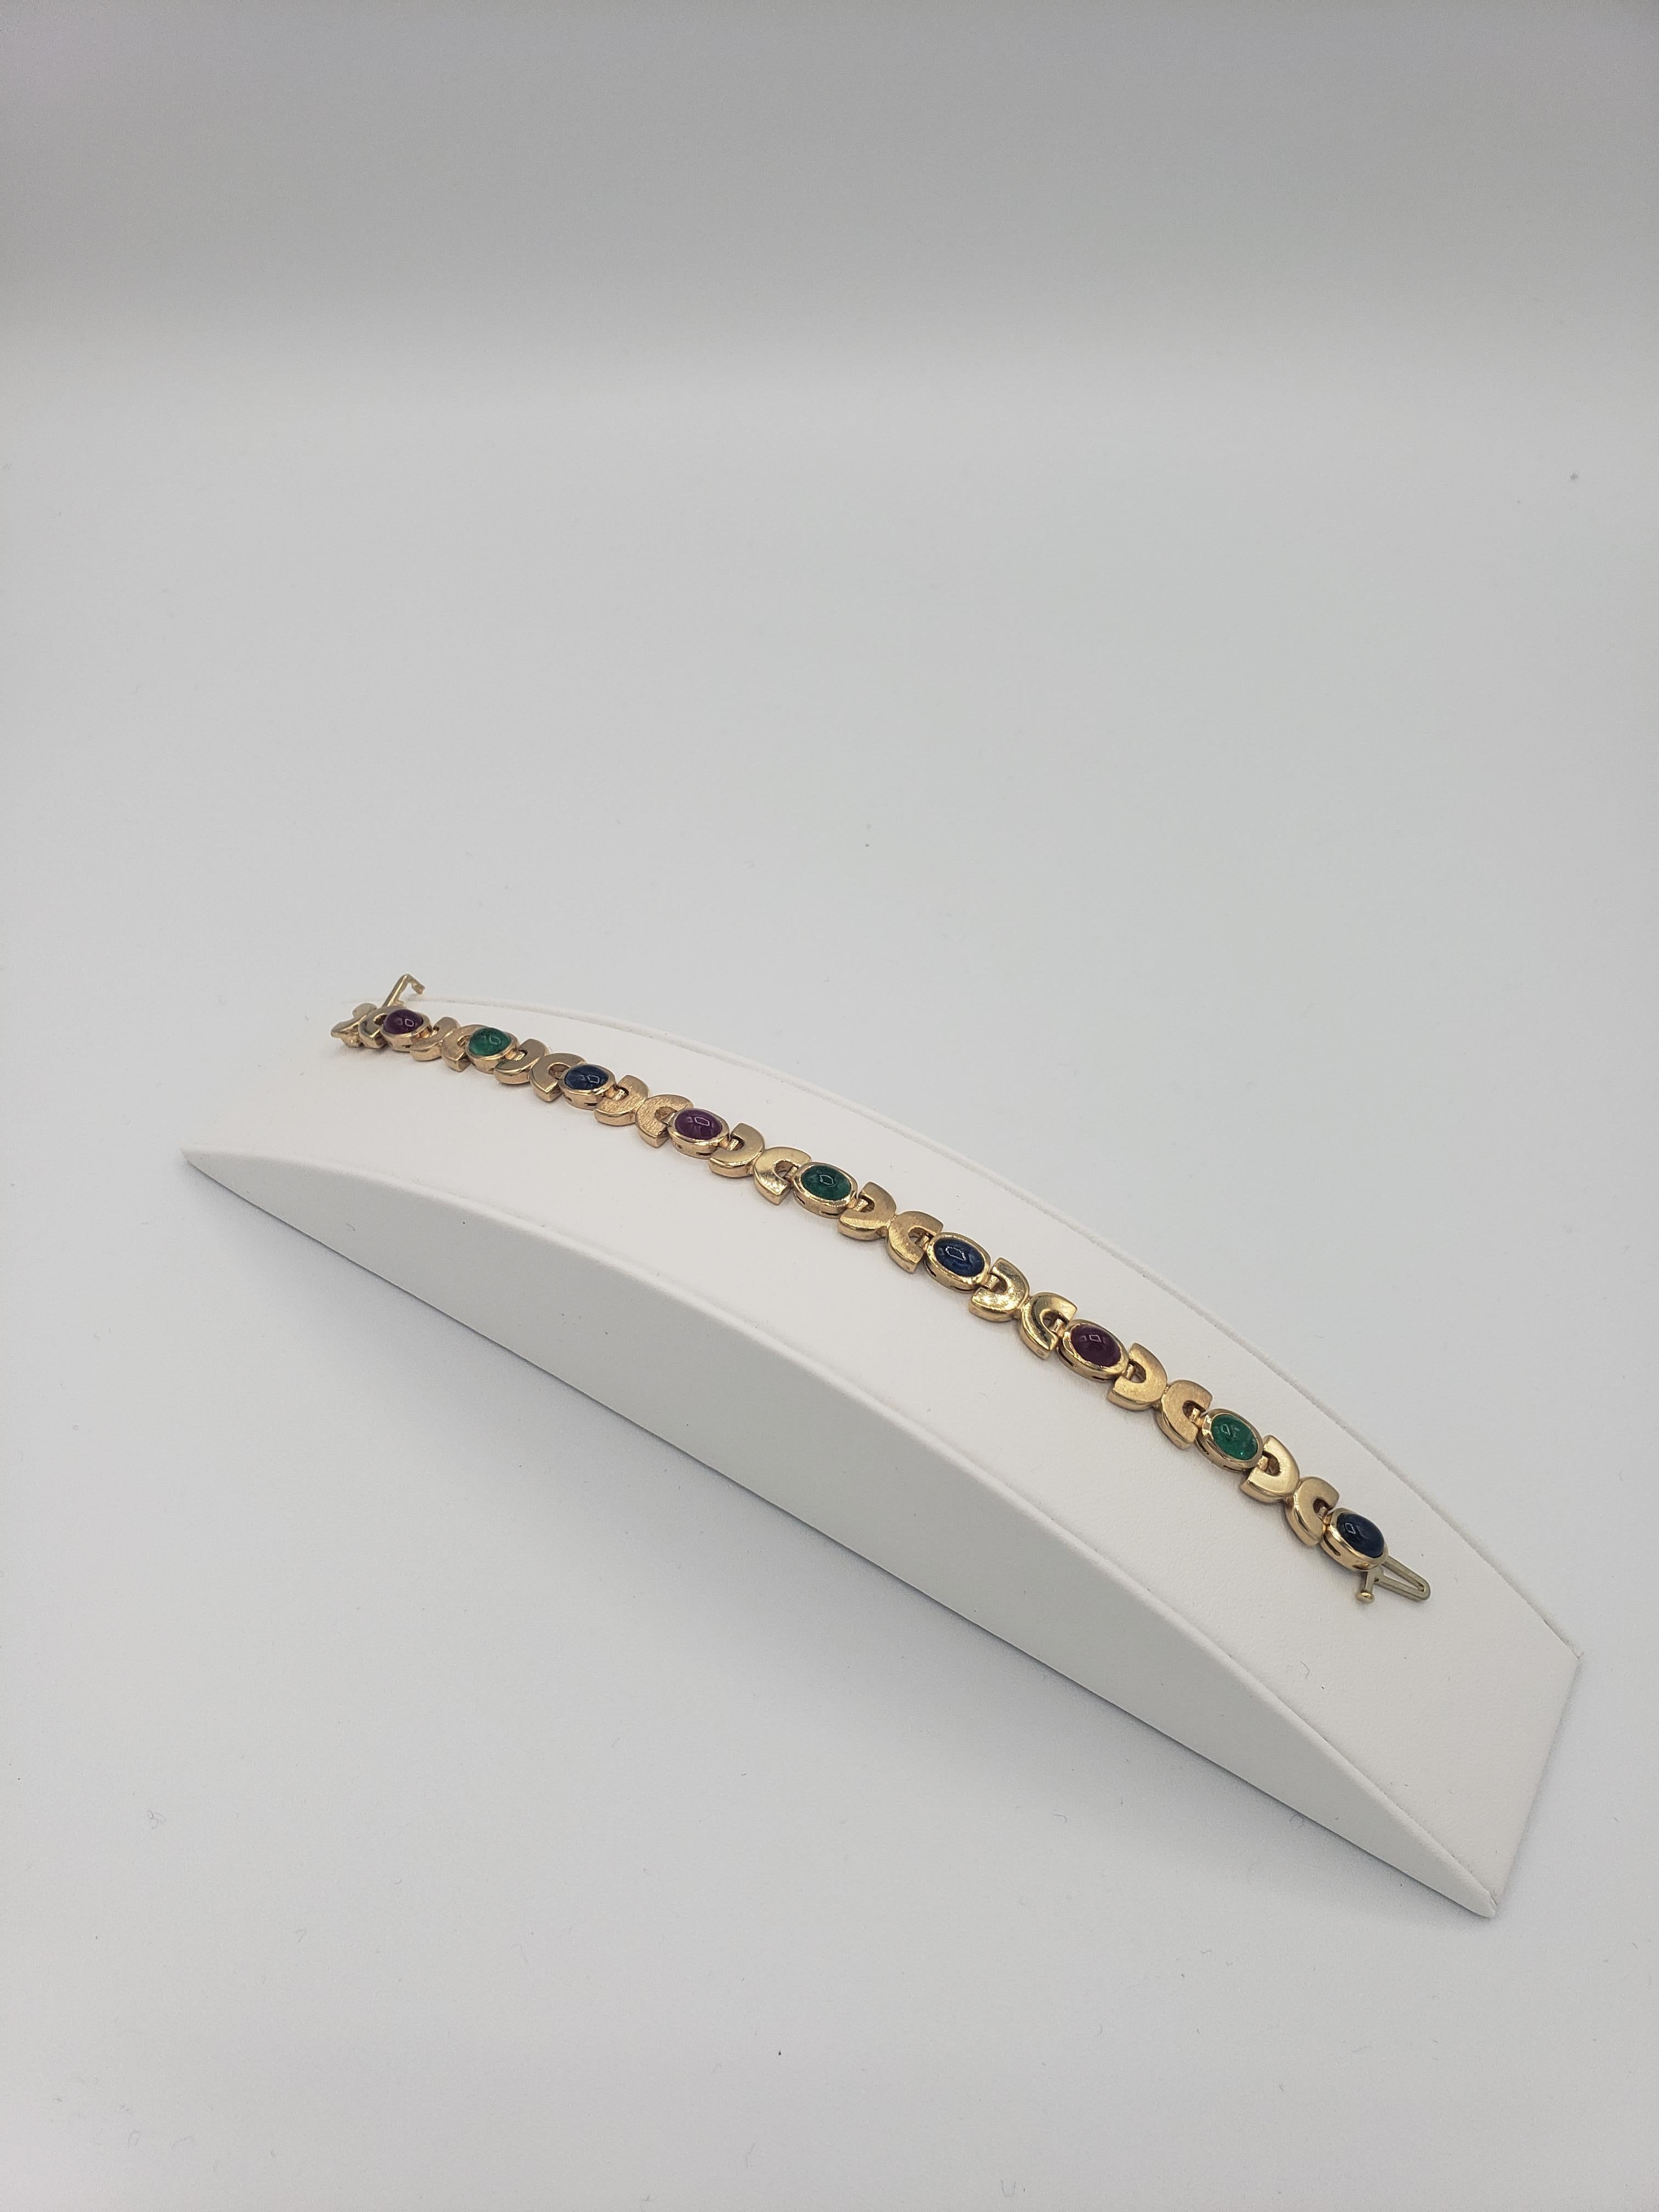 NEW Natural Ruby, Sapphire, Emerald Cabochon Bracelet in 14k Yellow Gold New For Sale 6